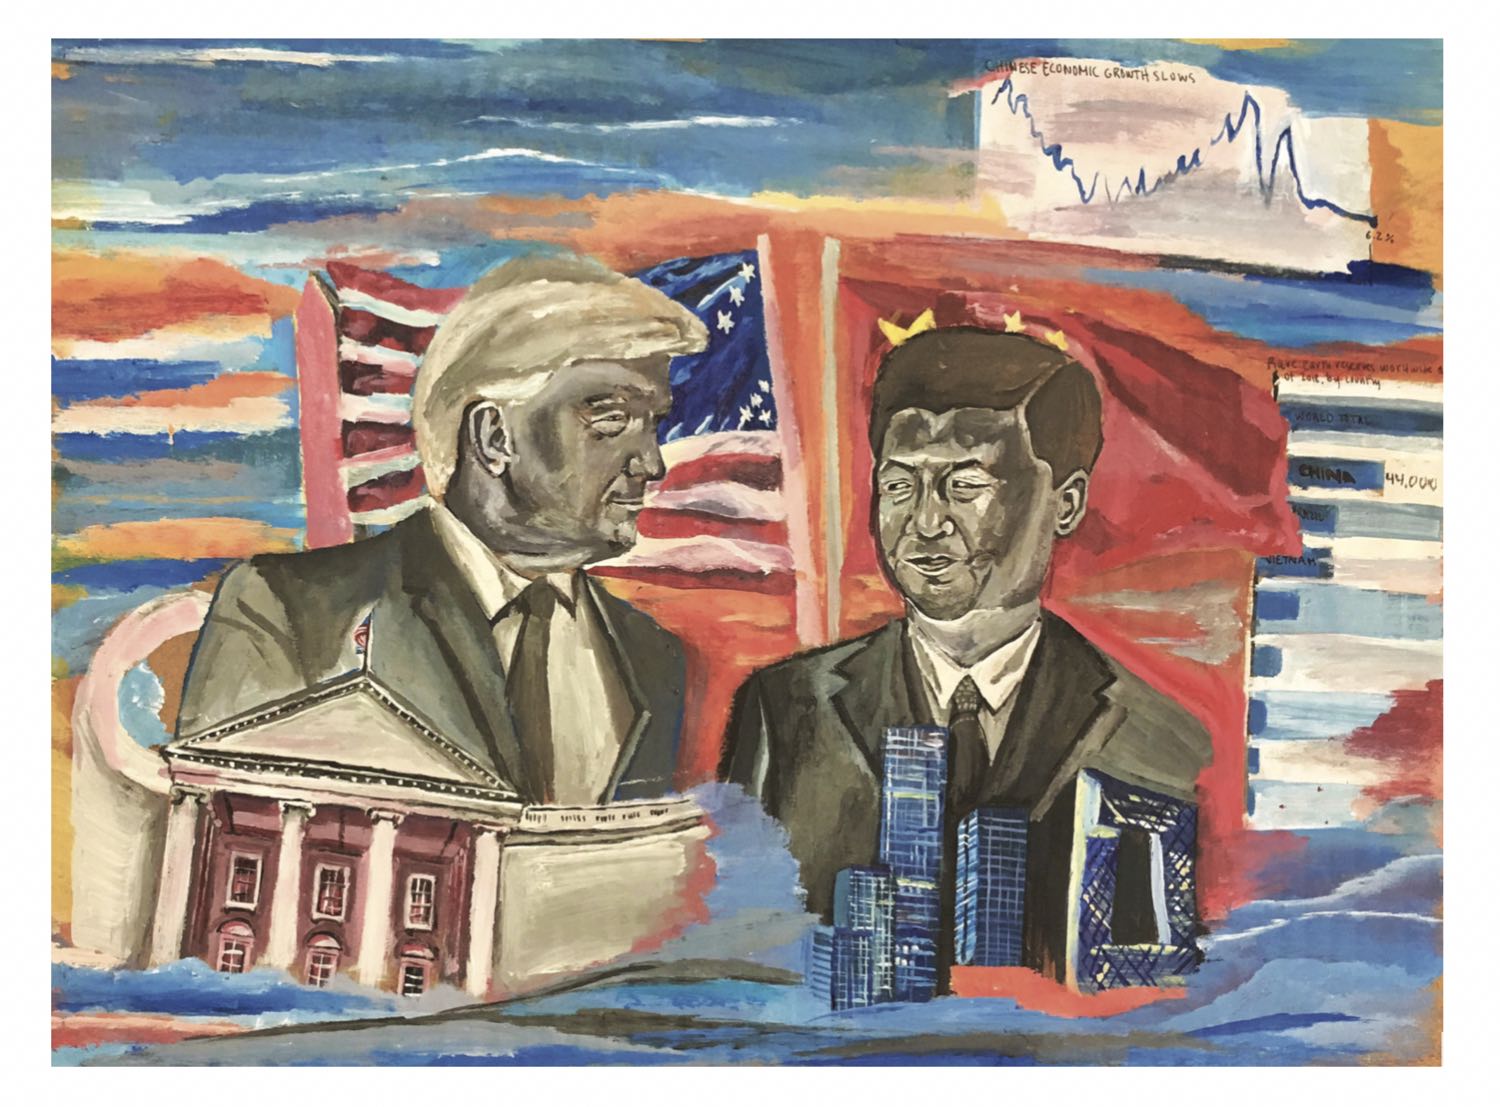 Donald Trump and Xi Jinping looking at each other, flags of the United States and China in the background.